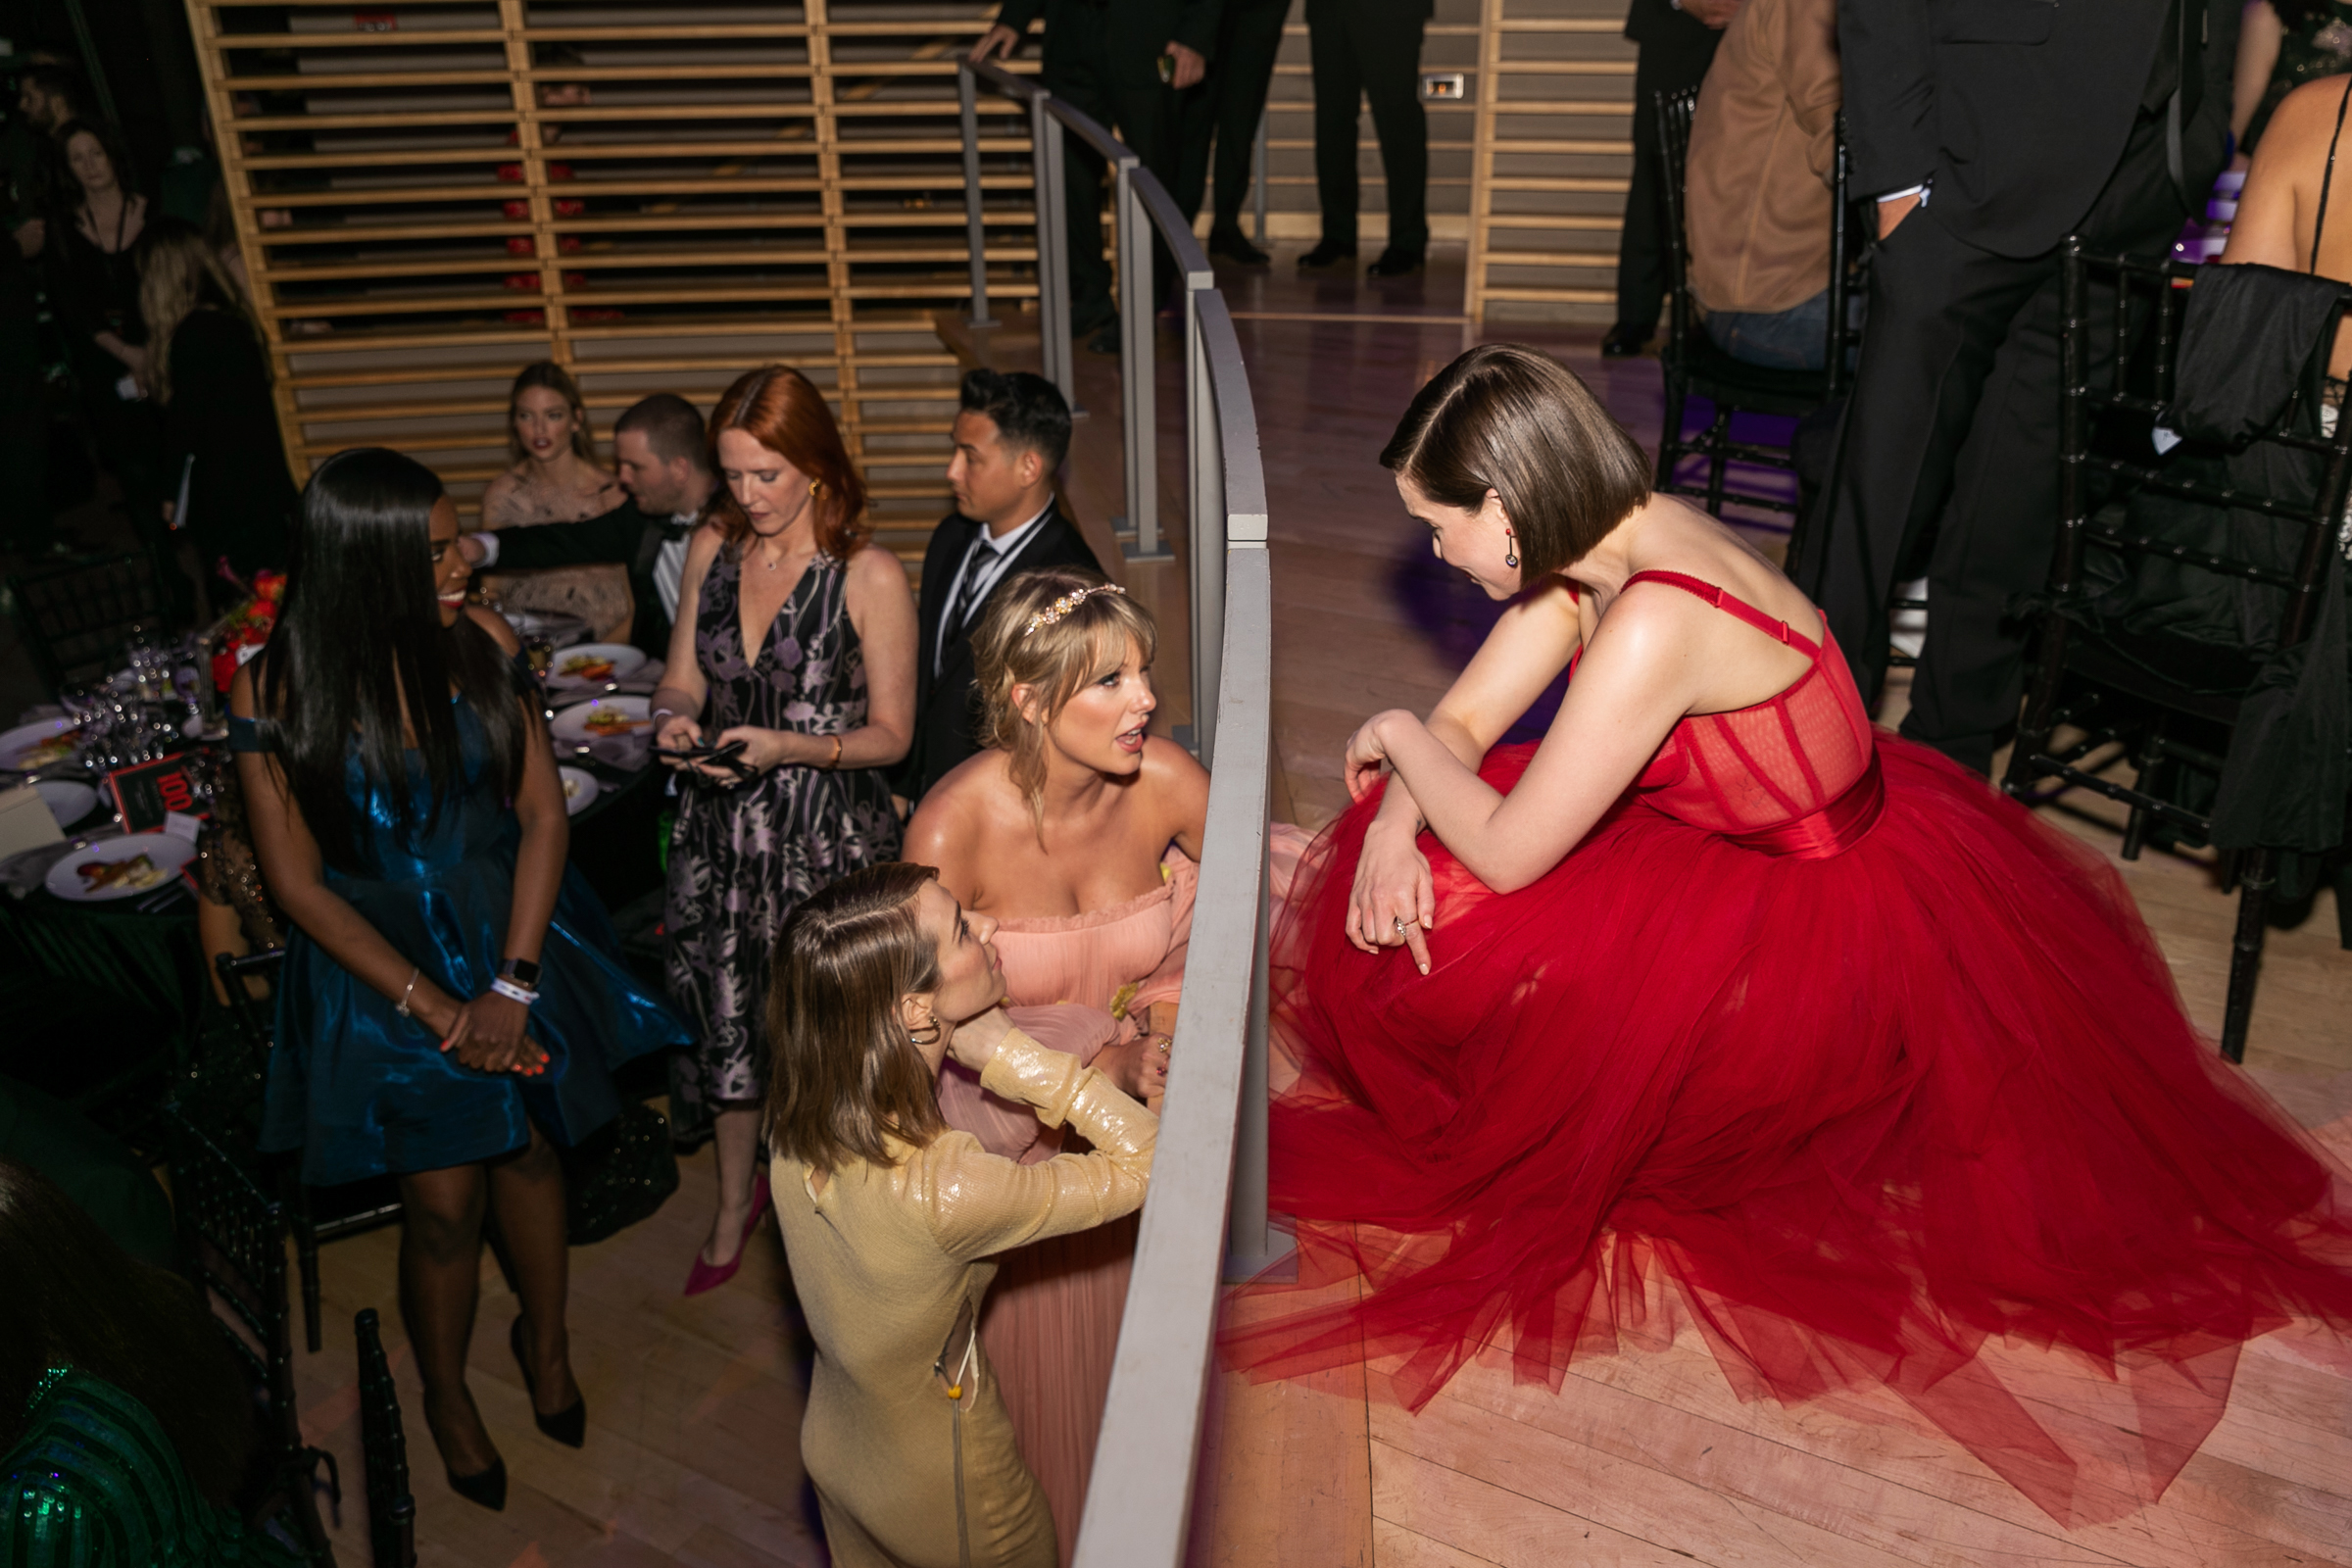 Taylor Swift and Emilia Clarke at the Time 100 Gala at Jazz at Lincoln Center in New York City on April 23, 2019. (Kevin Tachman for TIME)